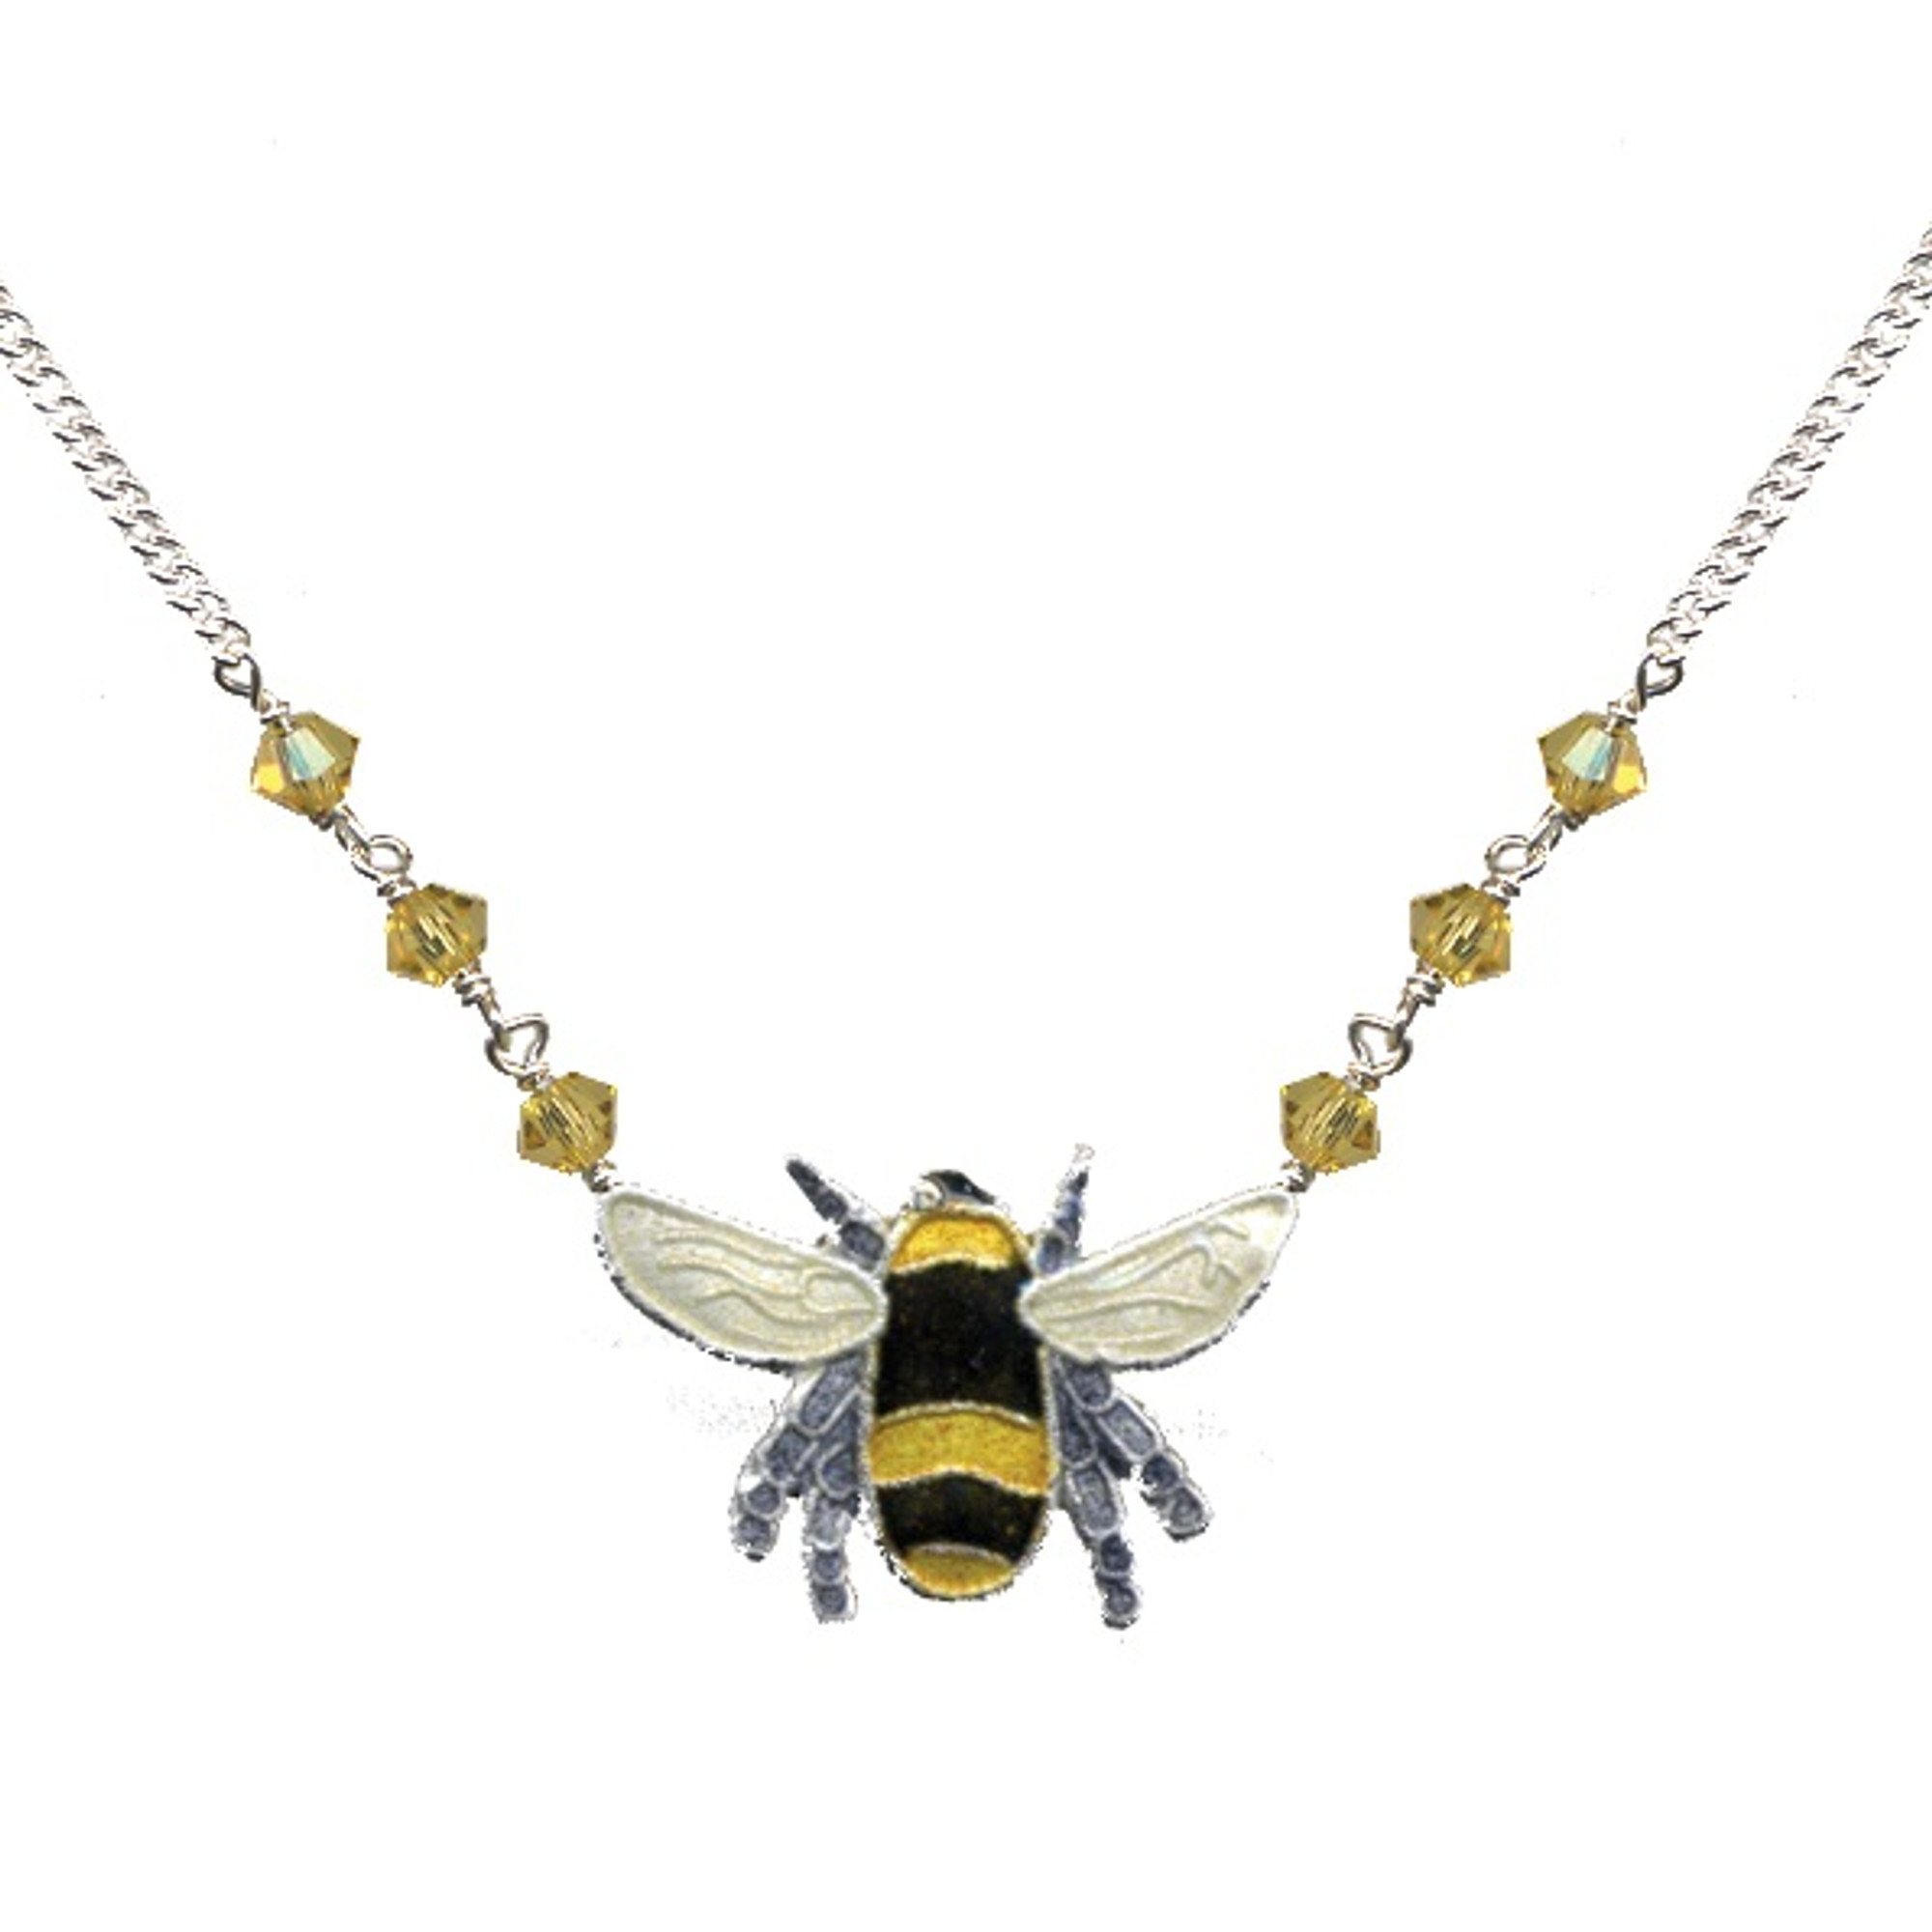 Frederic Sage 18K Yellow Gold Small Bumble Bee Necklace | Neiman Marcus